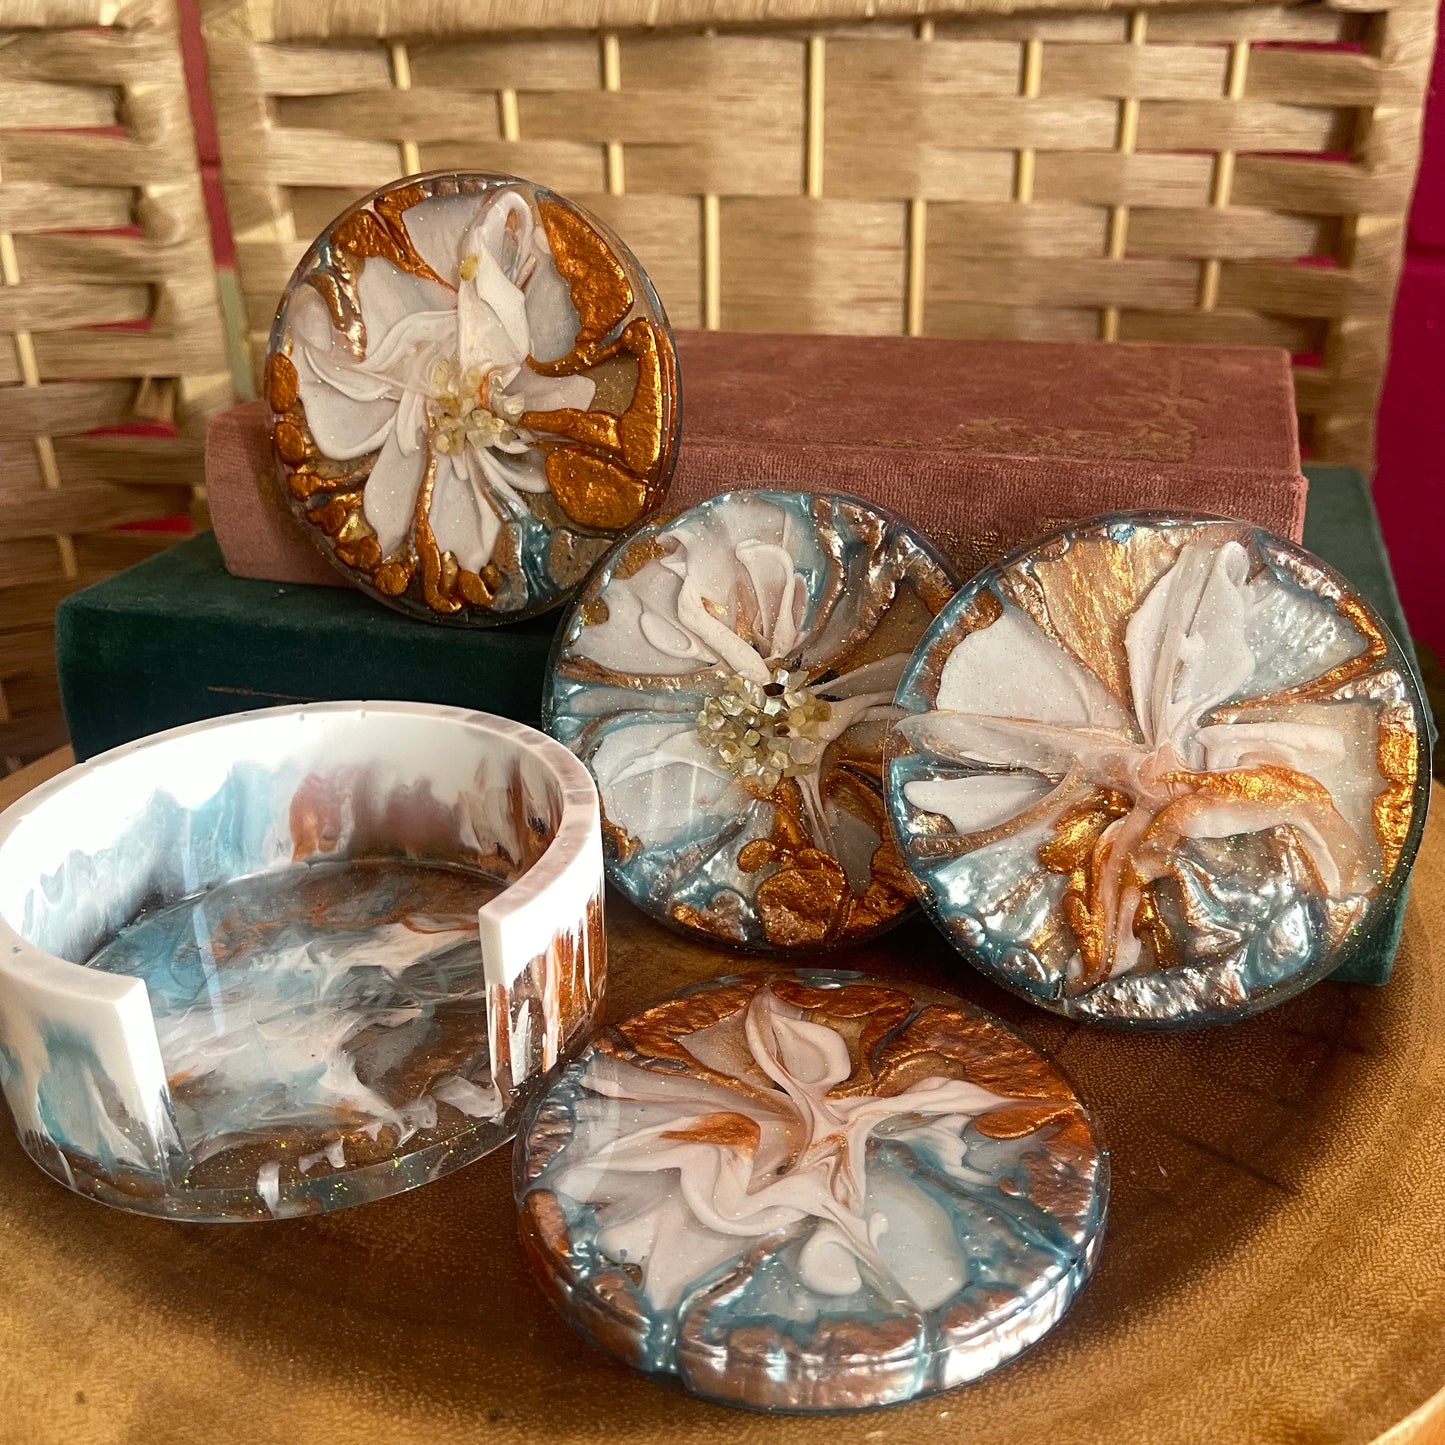 3D flower coaster - (all resin) Wednesday 4/24 at 6pm